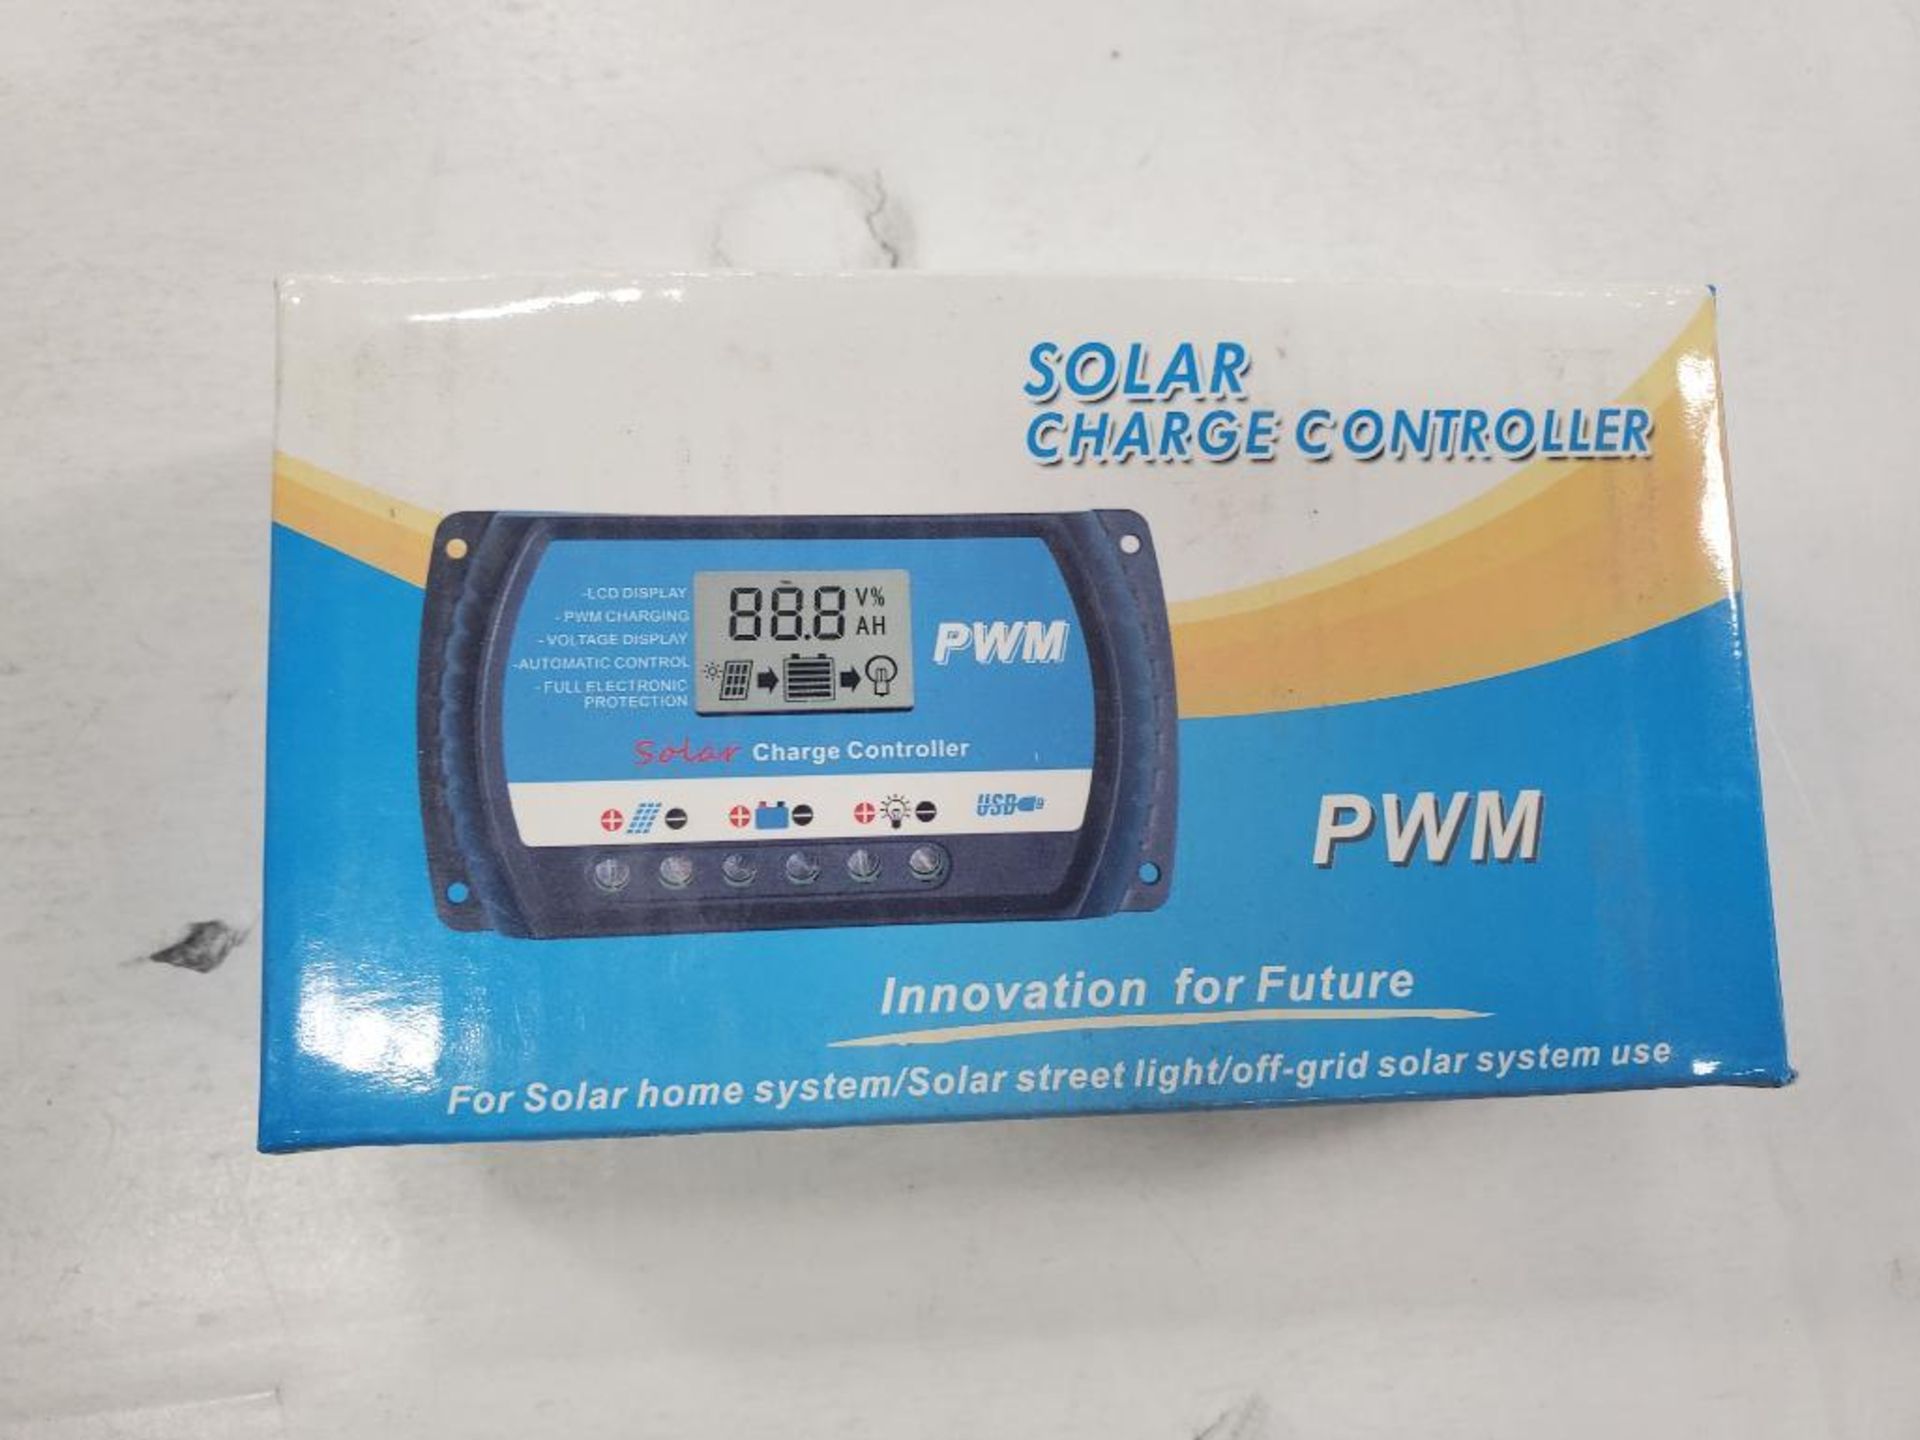 Qty 50 - PWM solar charge controller. New in box.